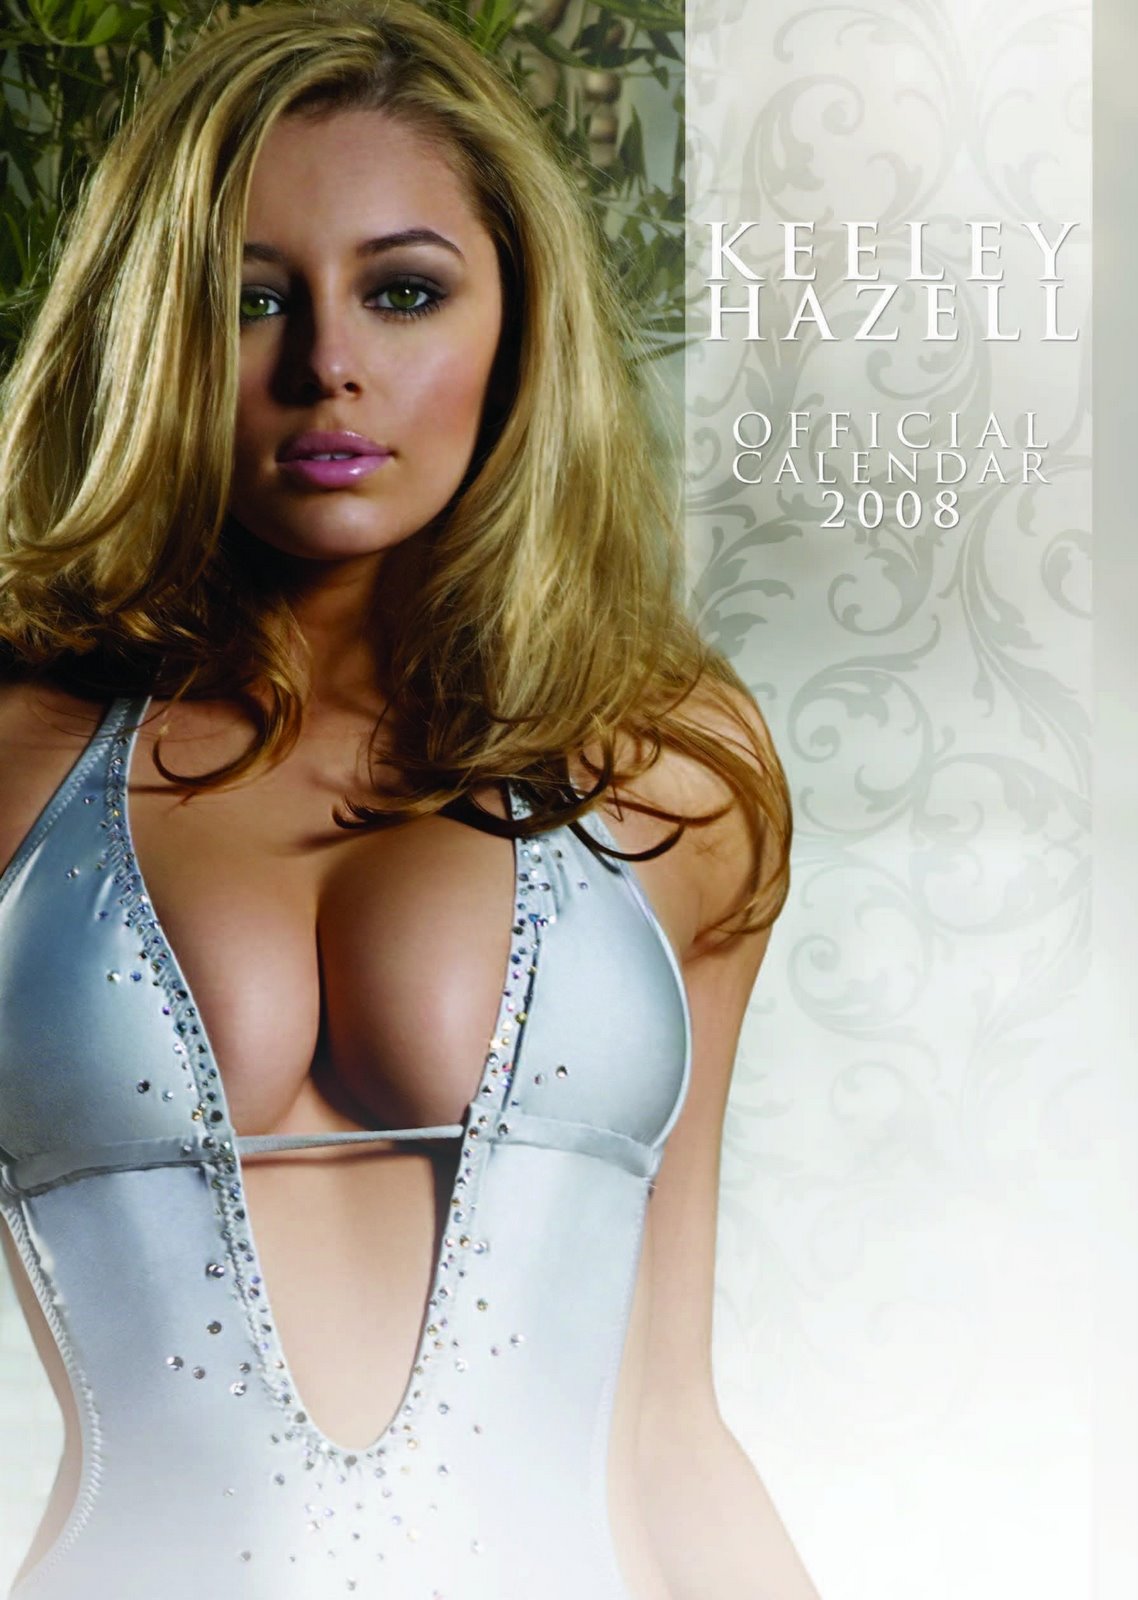 Download High quality Official Calendar 2008 cover front Keeley Hazell wallpaper / 1138x1600